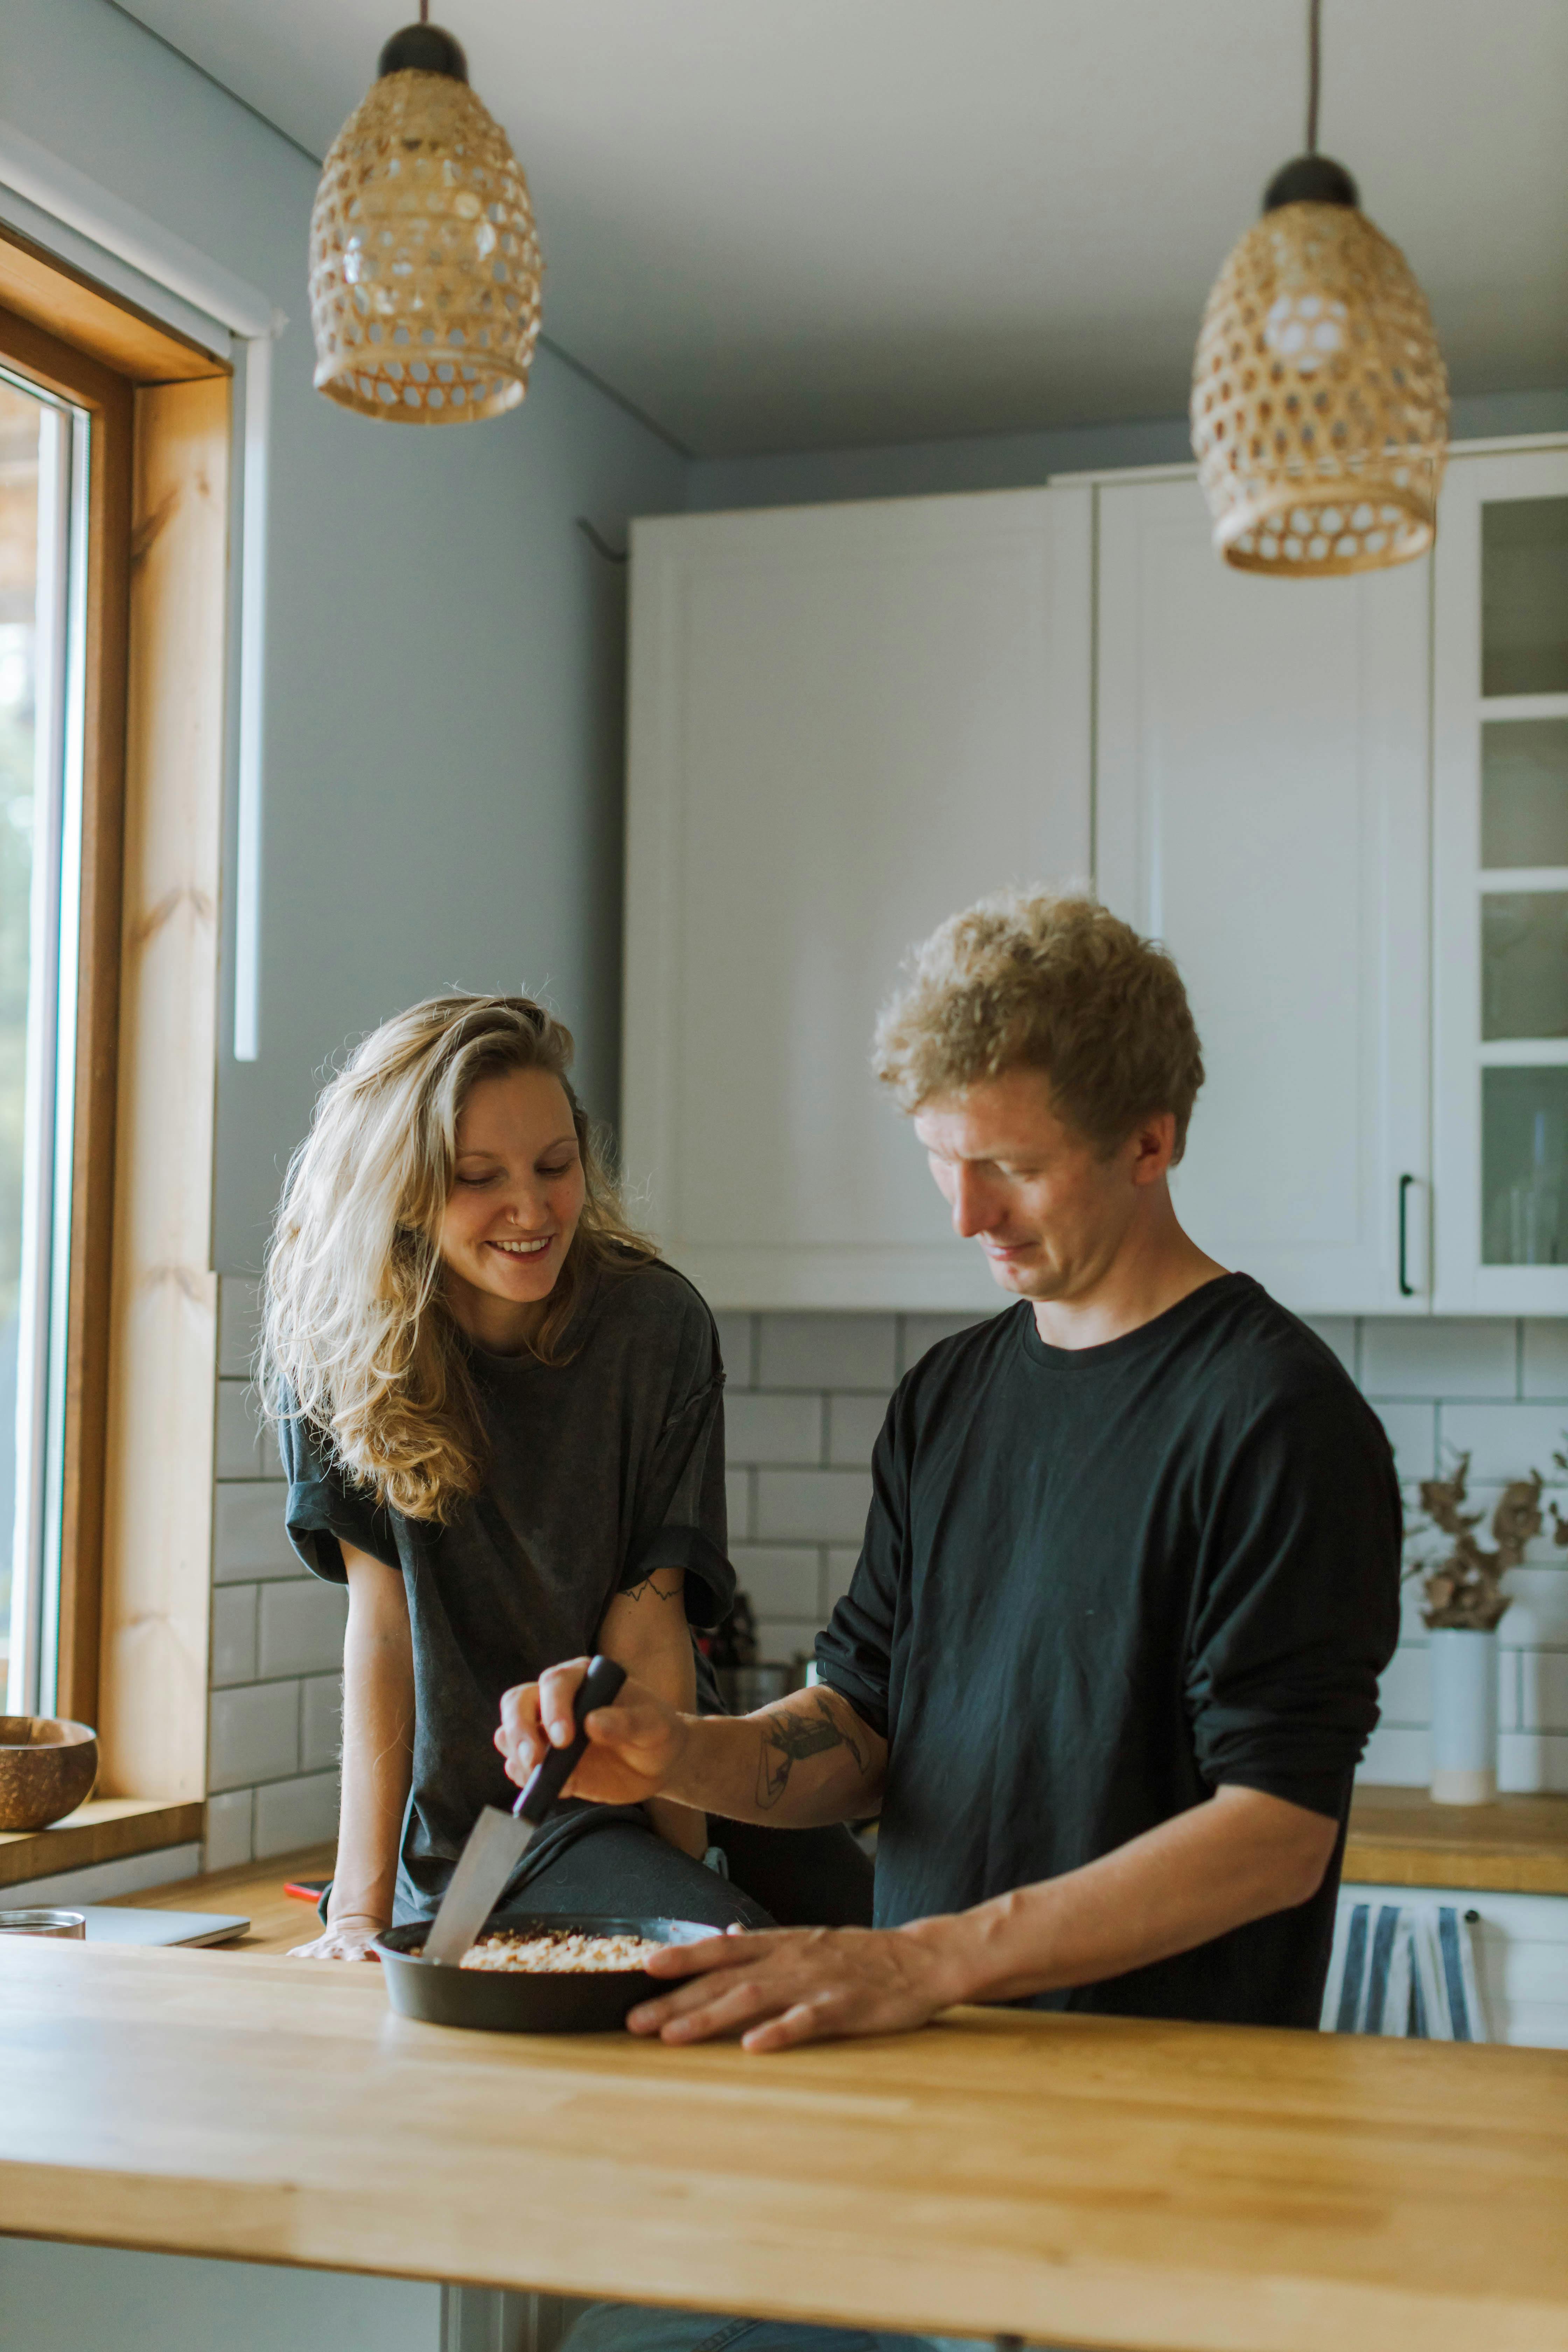 A couple cooking together | Source: Pexels